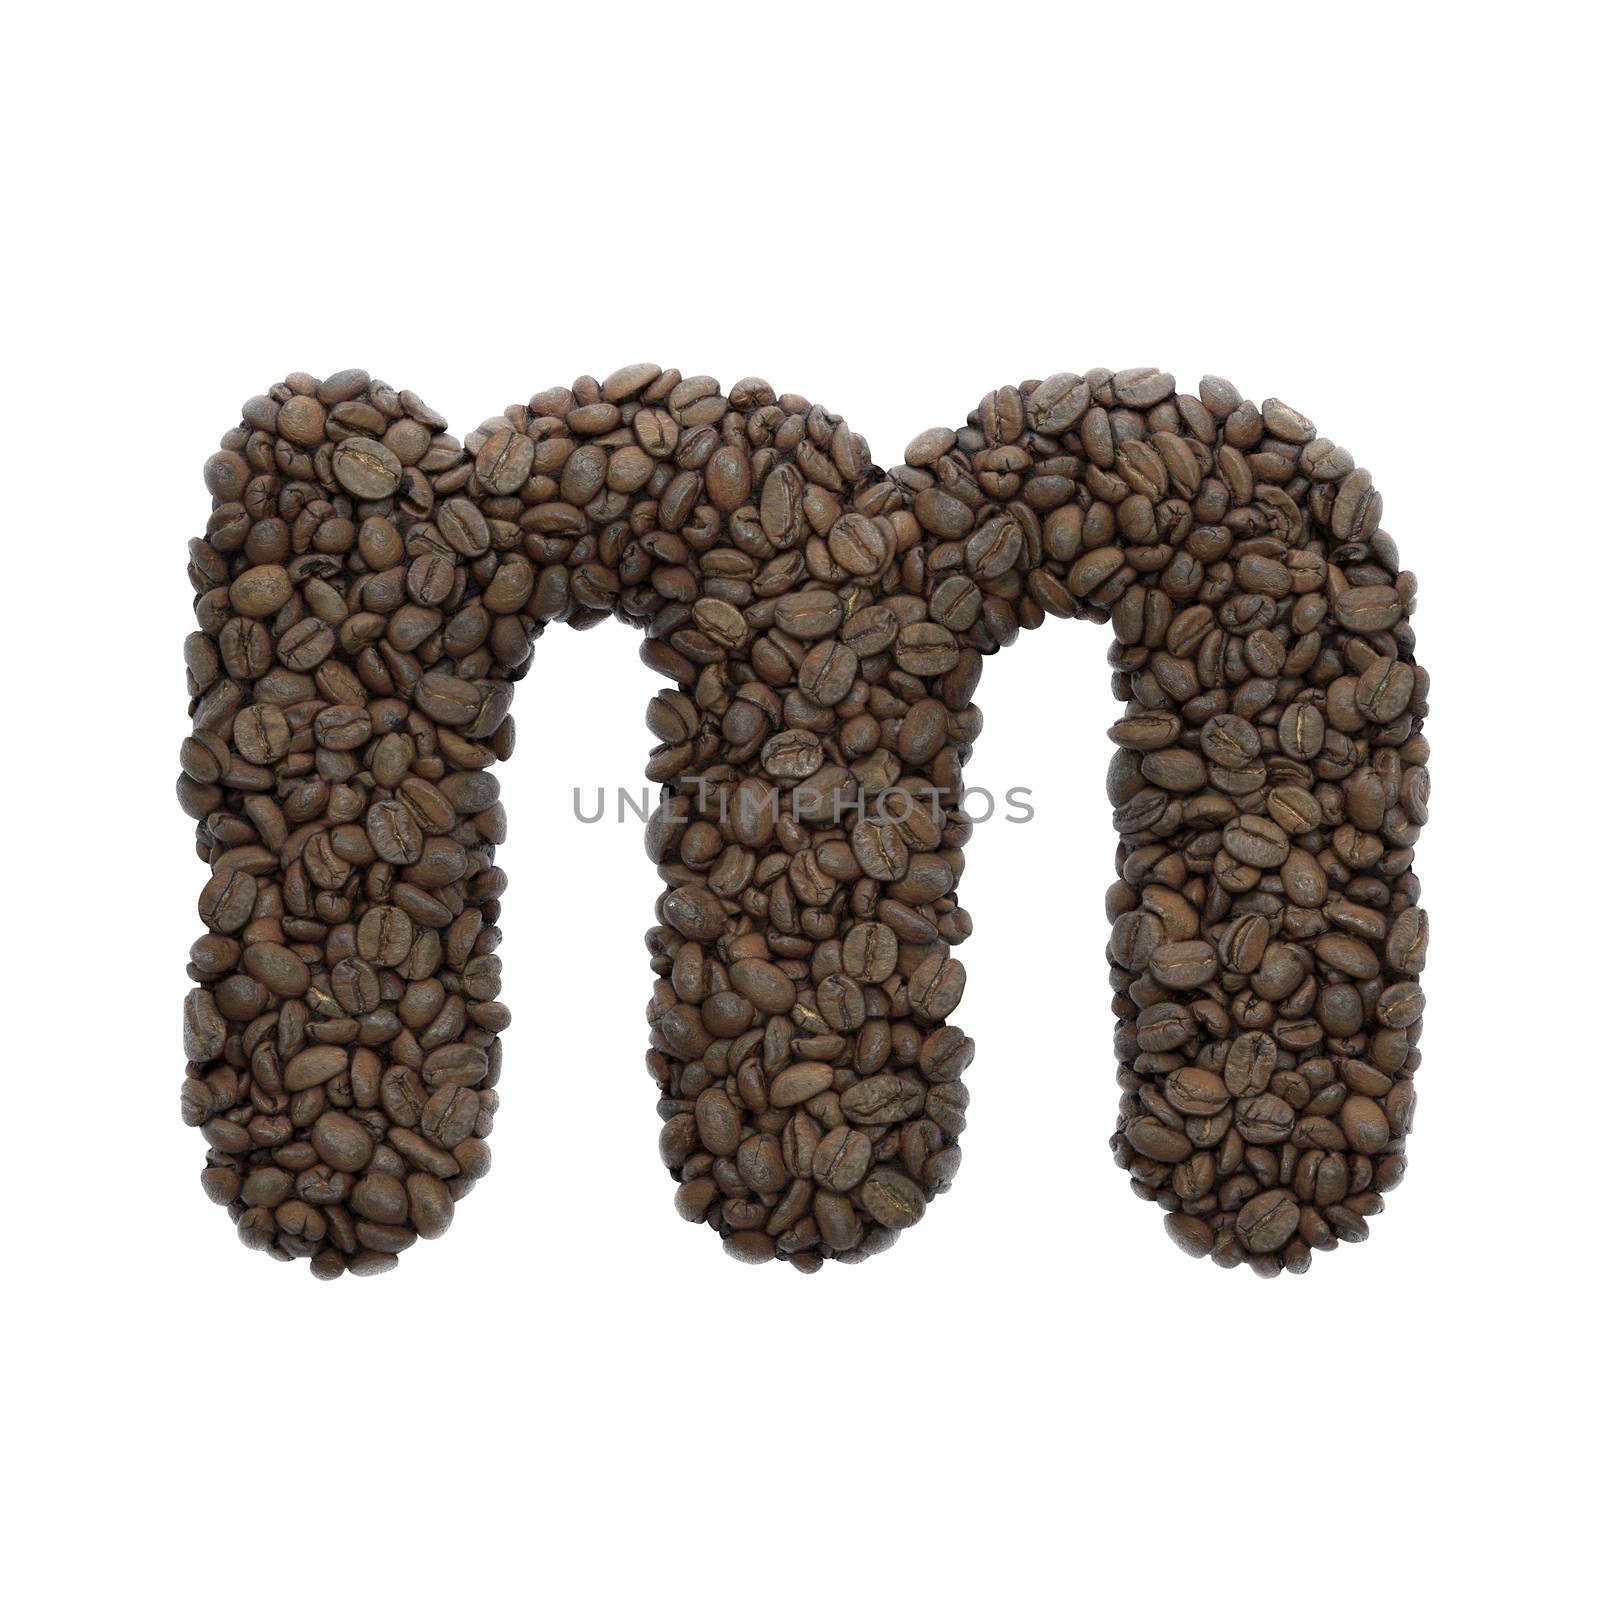 Coffee letter M - Lowercase 3d roasted beans font - Suitable for Coffee, energy or insomnia related subjects by chrisroll